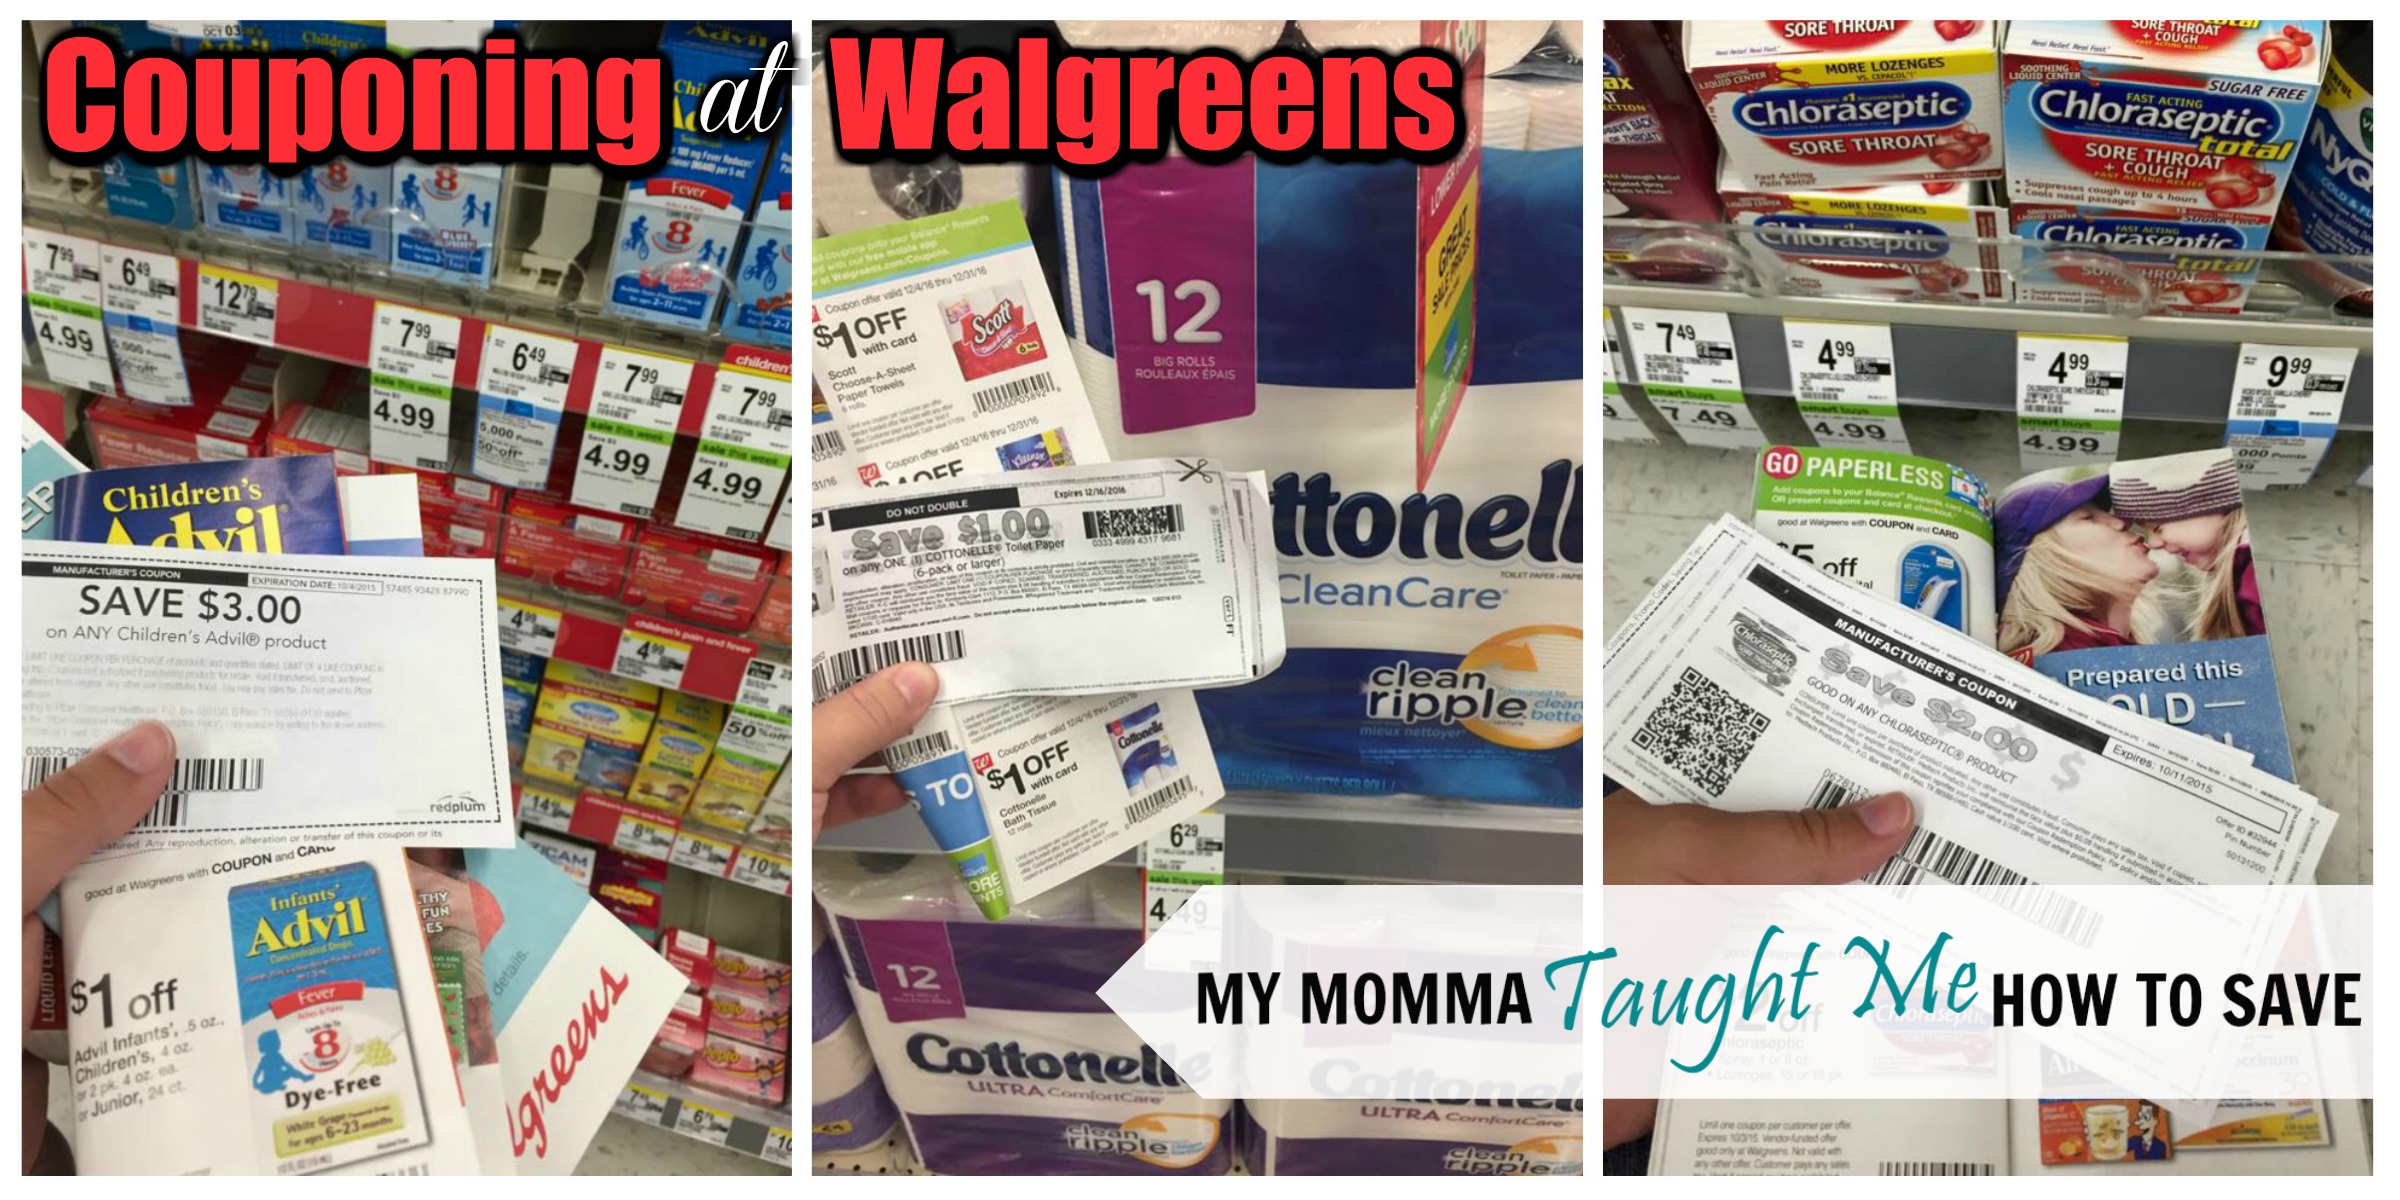 Couponing At Walgreens With My Momma Taught Me